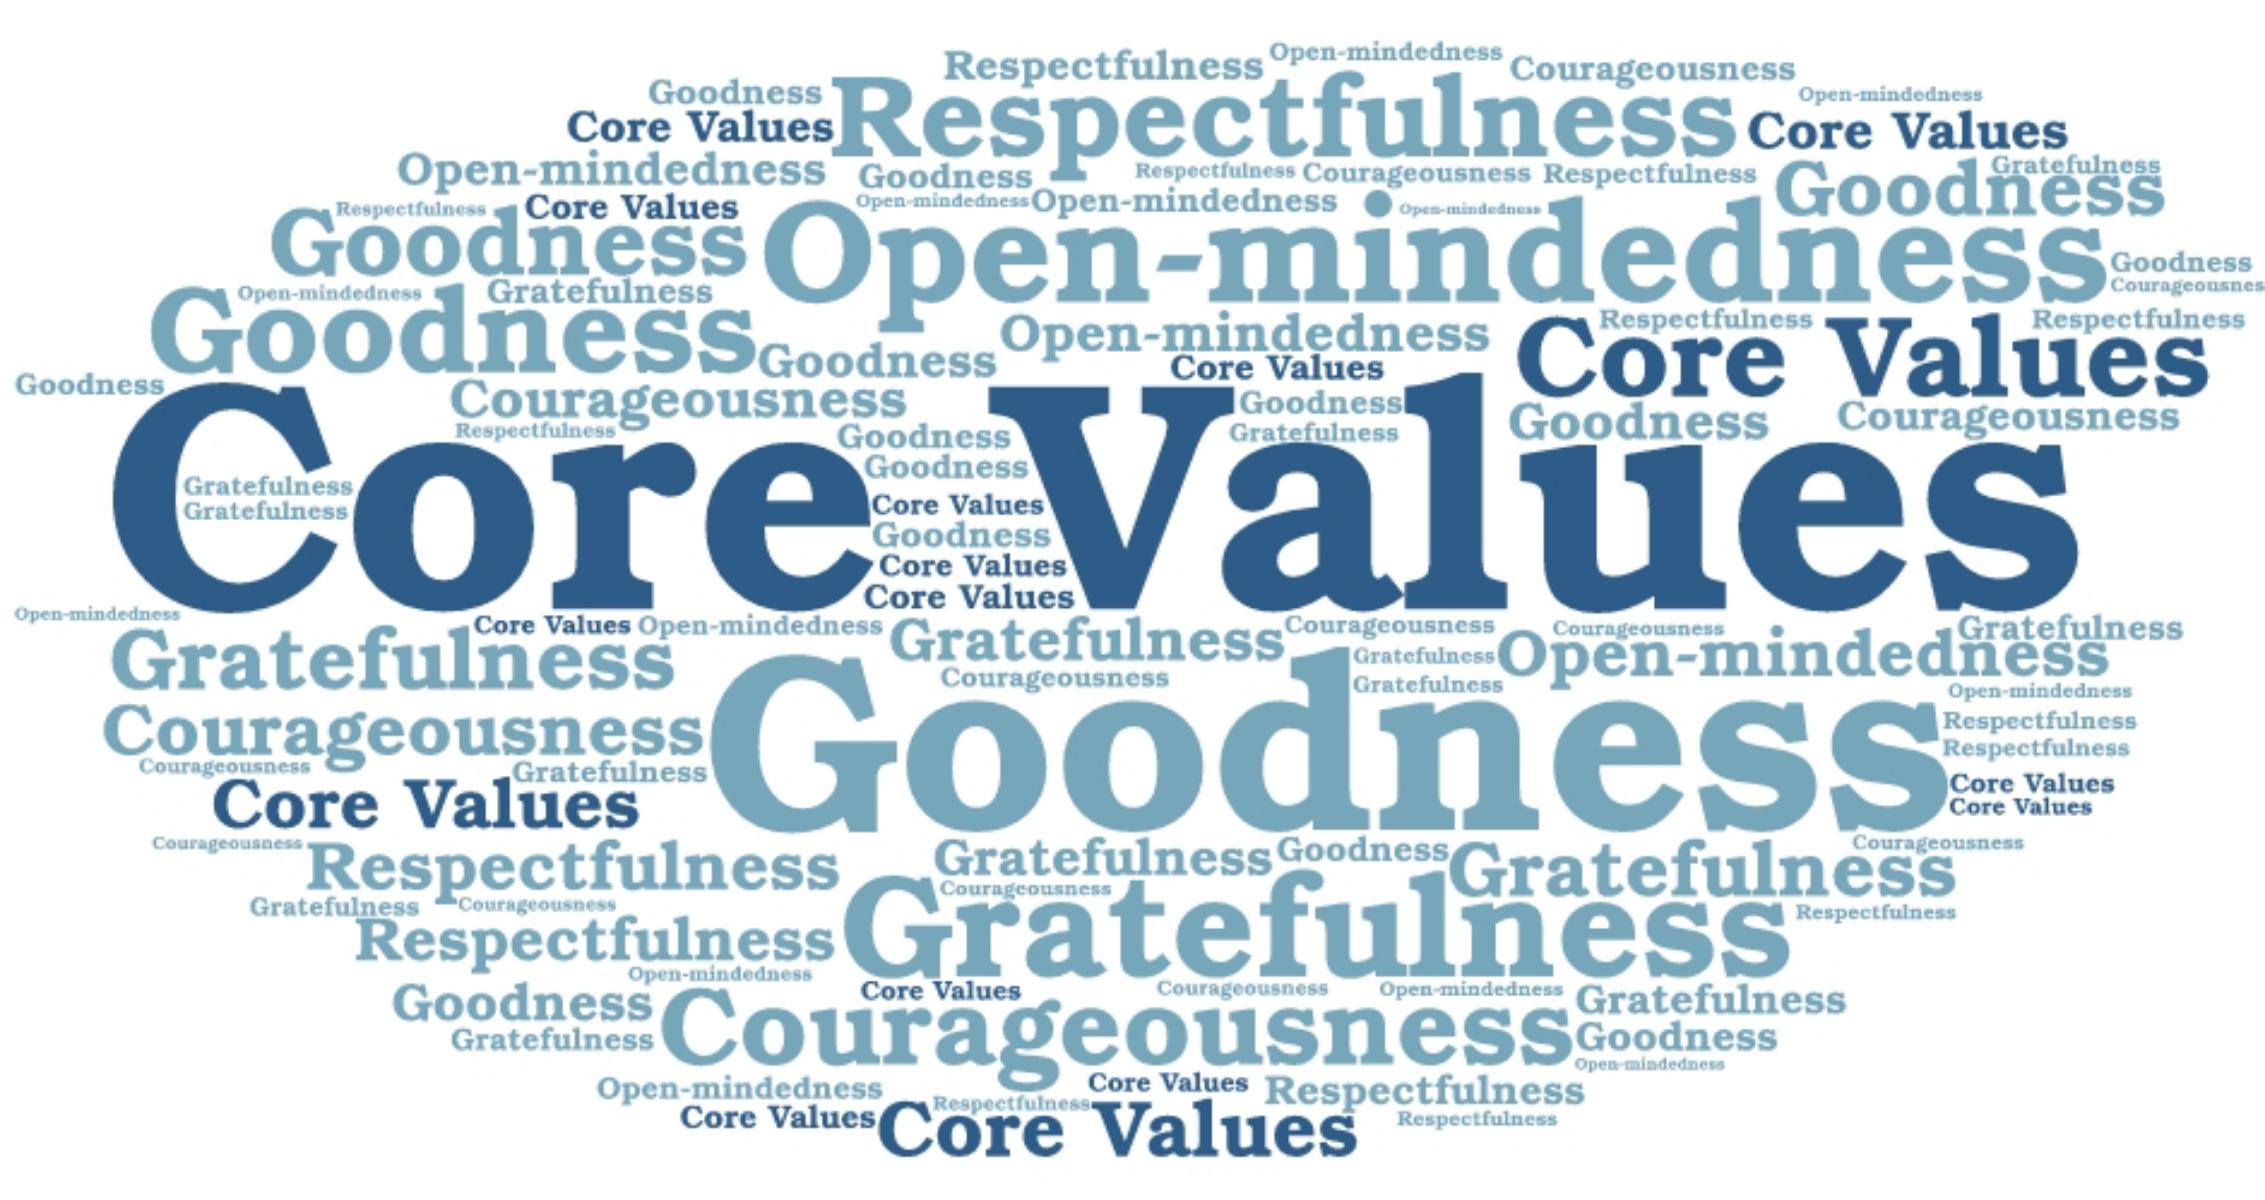 1. Write down your values